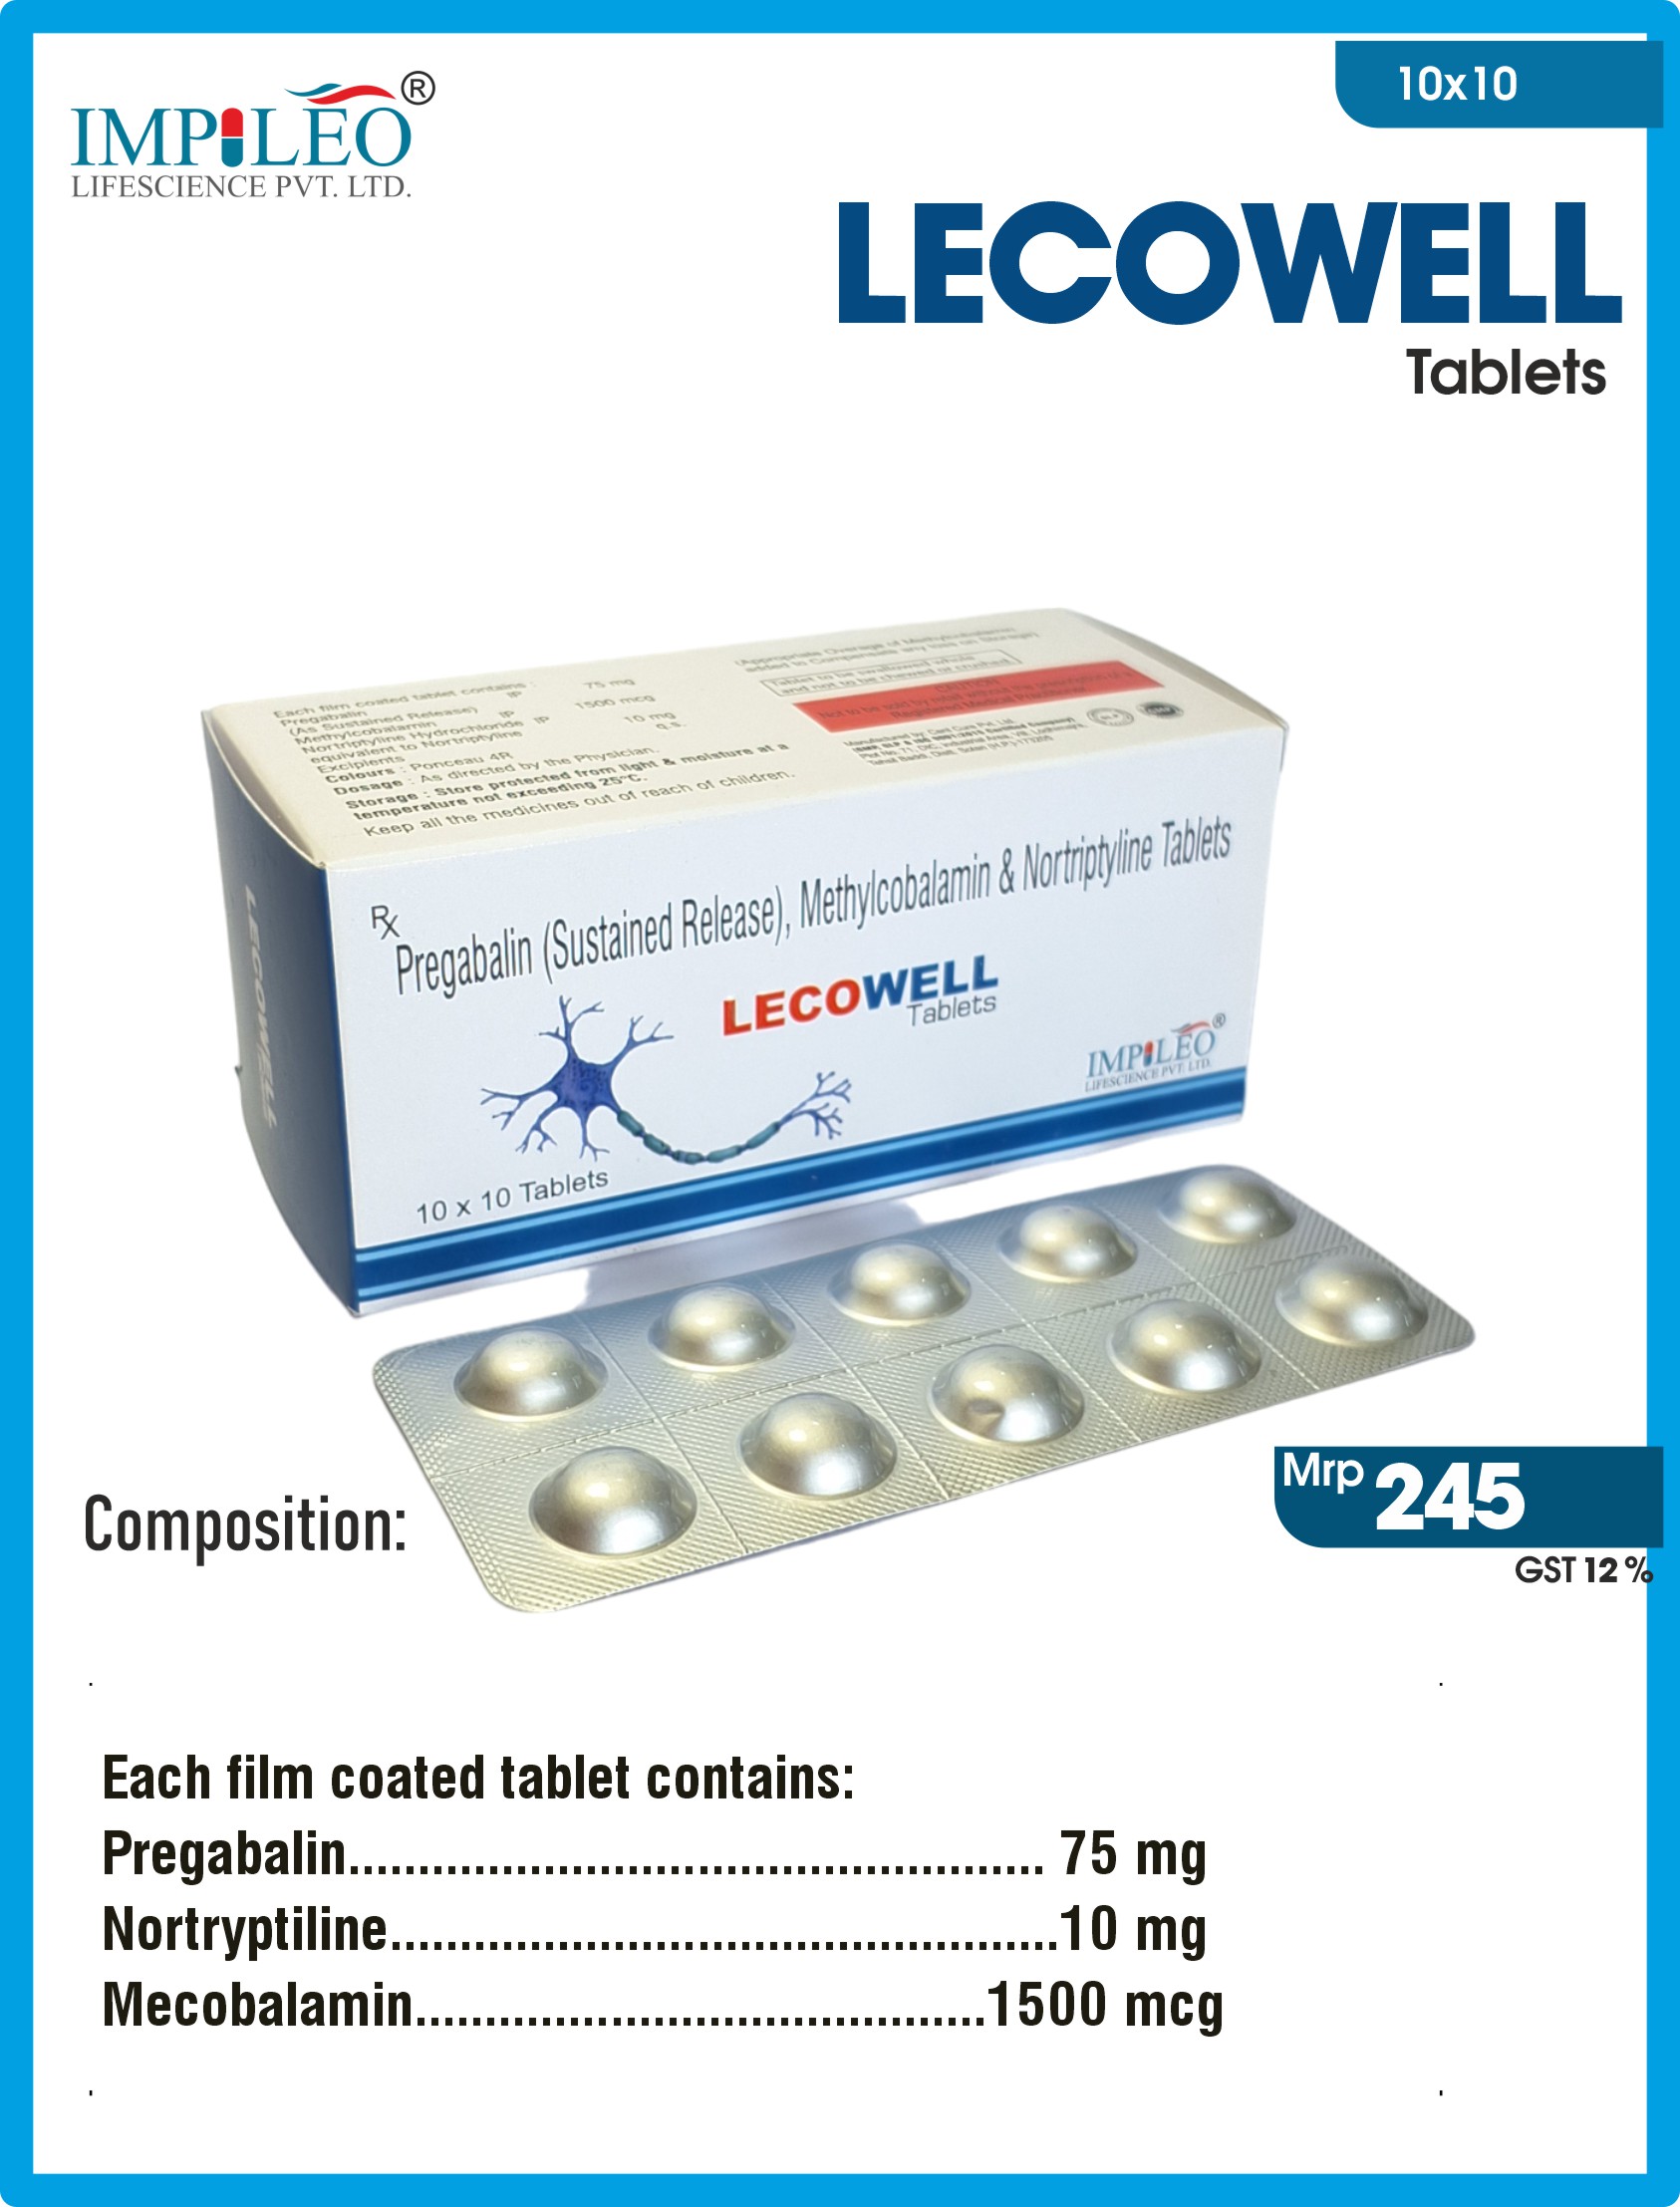 Secure Your Supply : Trusted PCD Pharma Franchise in India for Quality LECOWELL Tablets